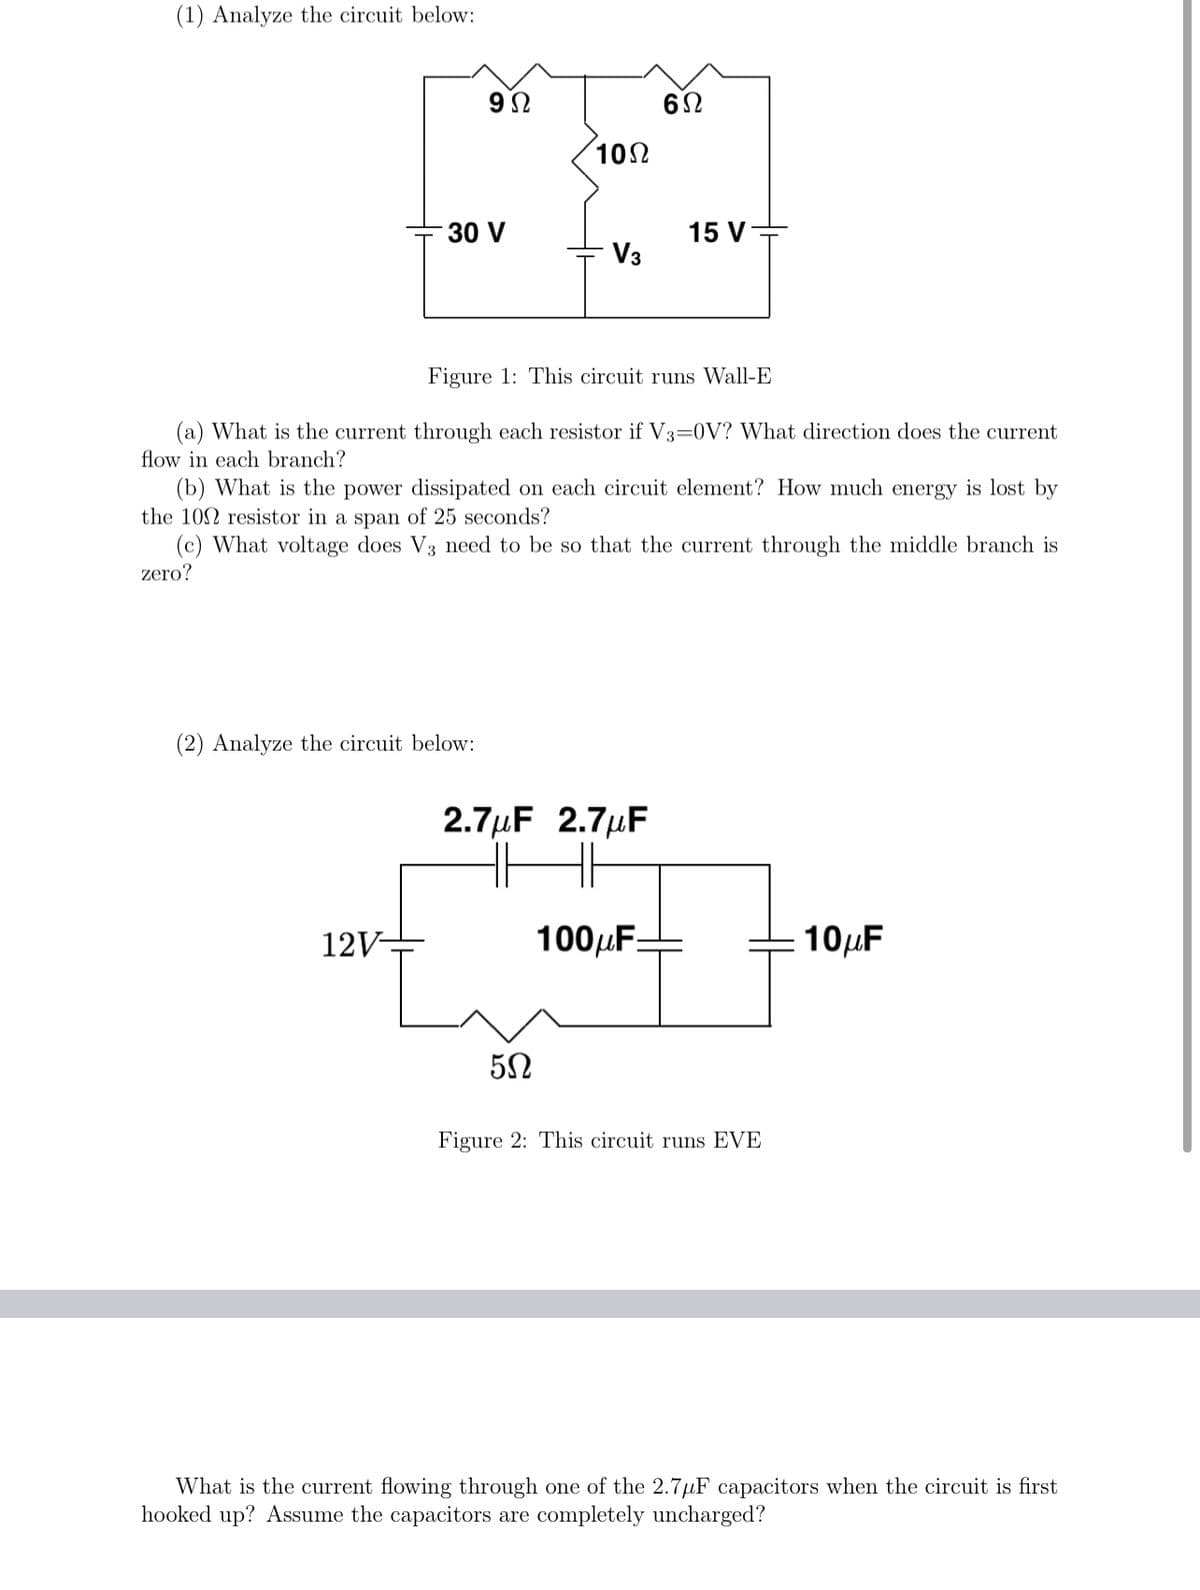 (1) Analyze the circuit below:
102
15 V
V3
30 V
Figure 1: This circuit runs Wall-E
(a) What is the current through each resistor if V3=0V? What direction does the current
flow in each branch?
(b) What is the power dissipated on each circuit element? How much energy is lost by
the 102 resistor in a span of 25 seconds?
(c) What voltage does V3 need to be so that the current through the middle branch is
zero?
(2) Analyze the circuit below:
2.7µF 2.7µF
12V-
100µFE
10µF
Figure 2: This circuit runs EVE
What is the current flowing through one of the 2.7µF capacitors when the circuit is first
hooked up? Assume the capacitors are completely uncharged?
